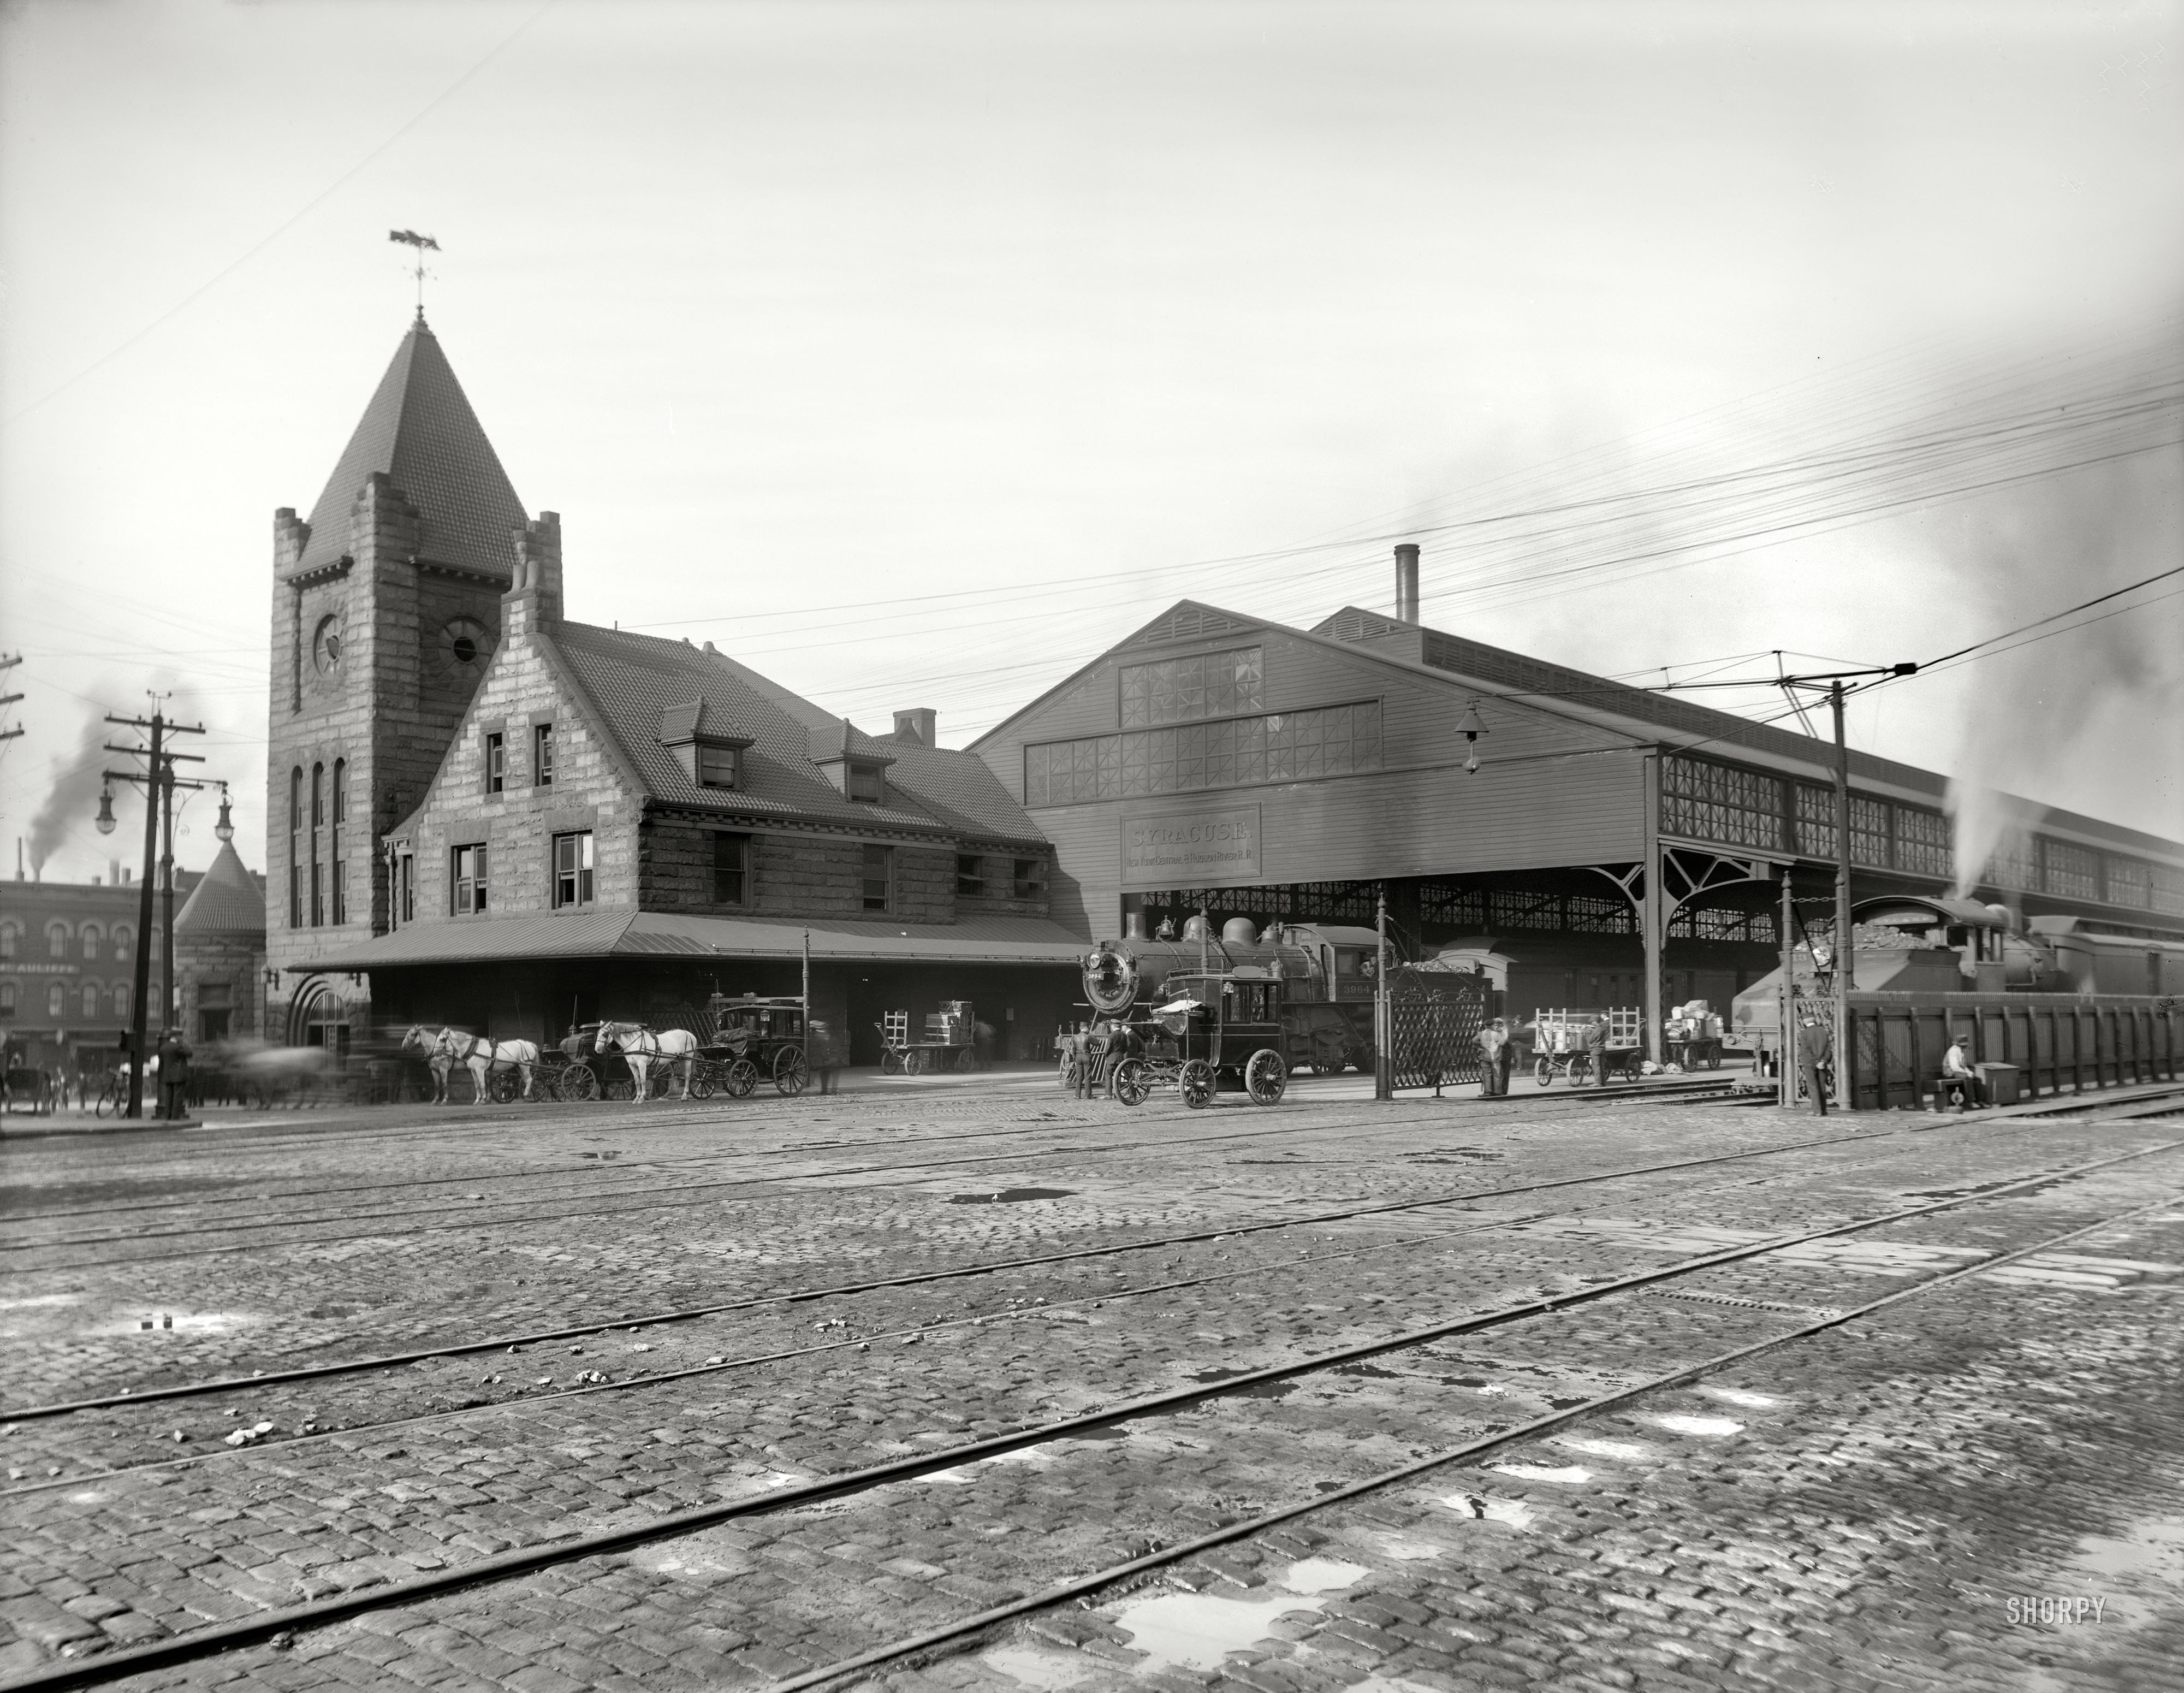 Syracuse, New York, circa 1905. "New York Central R.R. depot." Locomotive sharing the spotlight with an electric brougham. View full size.